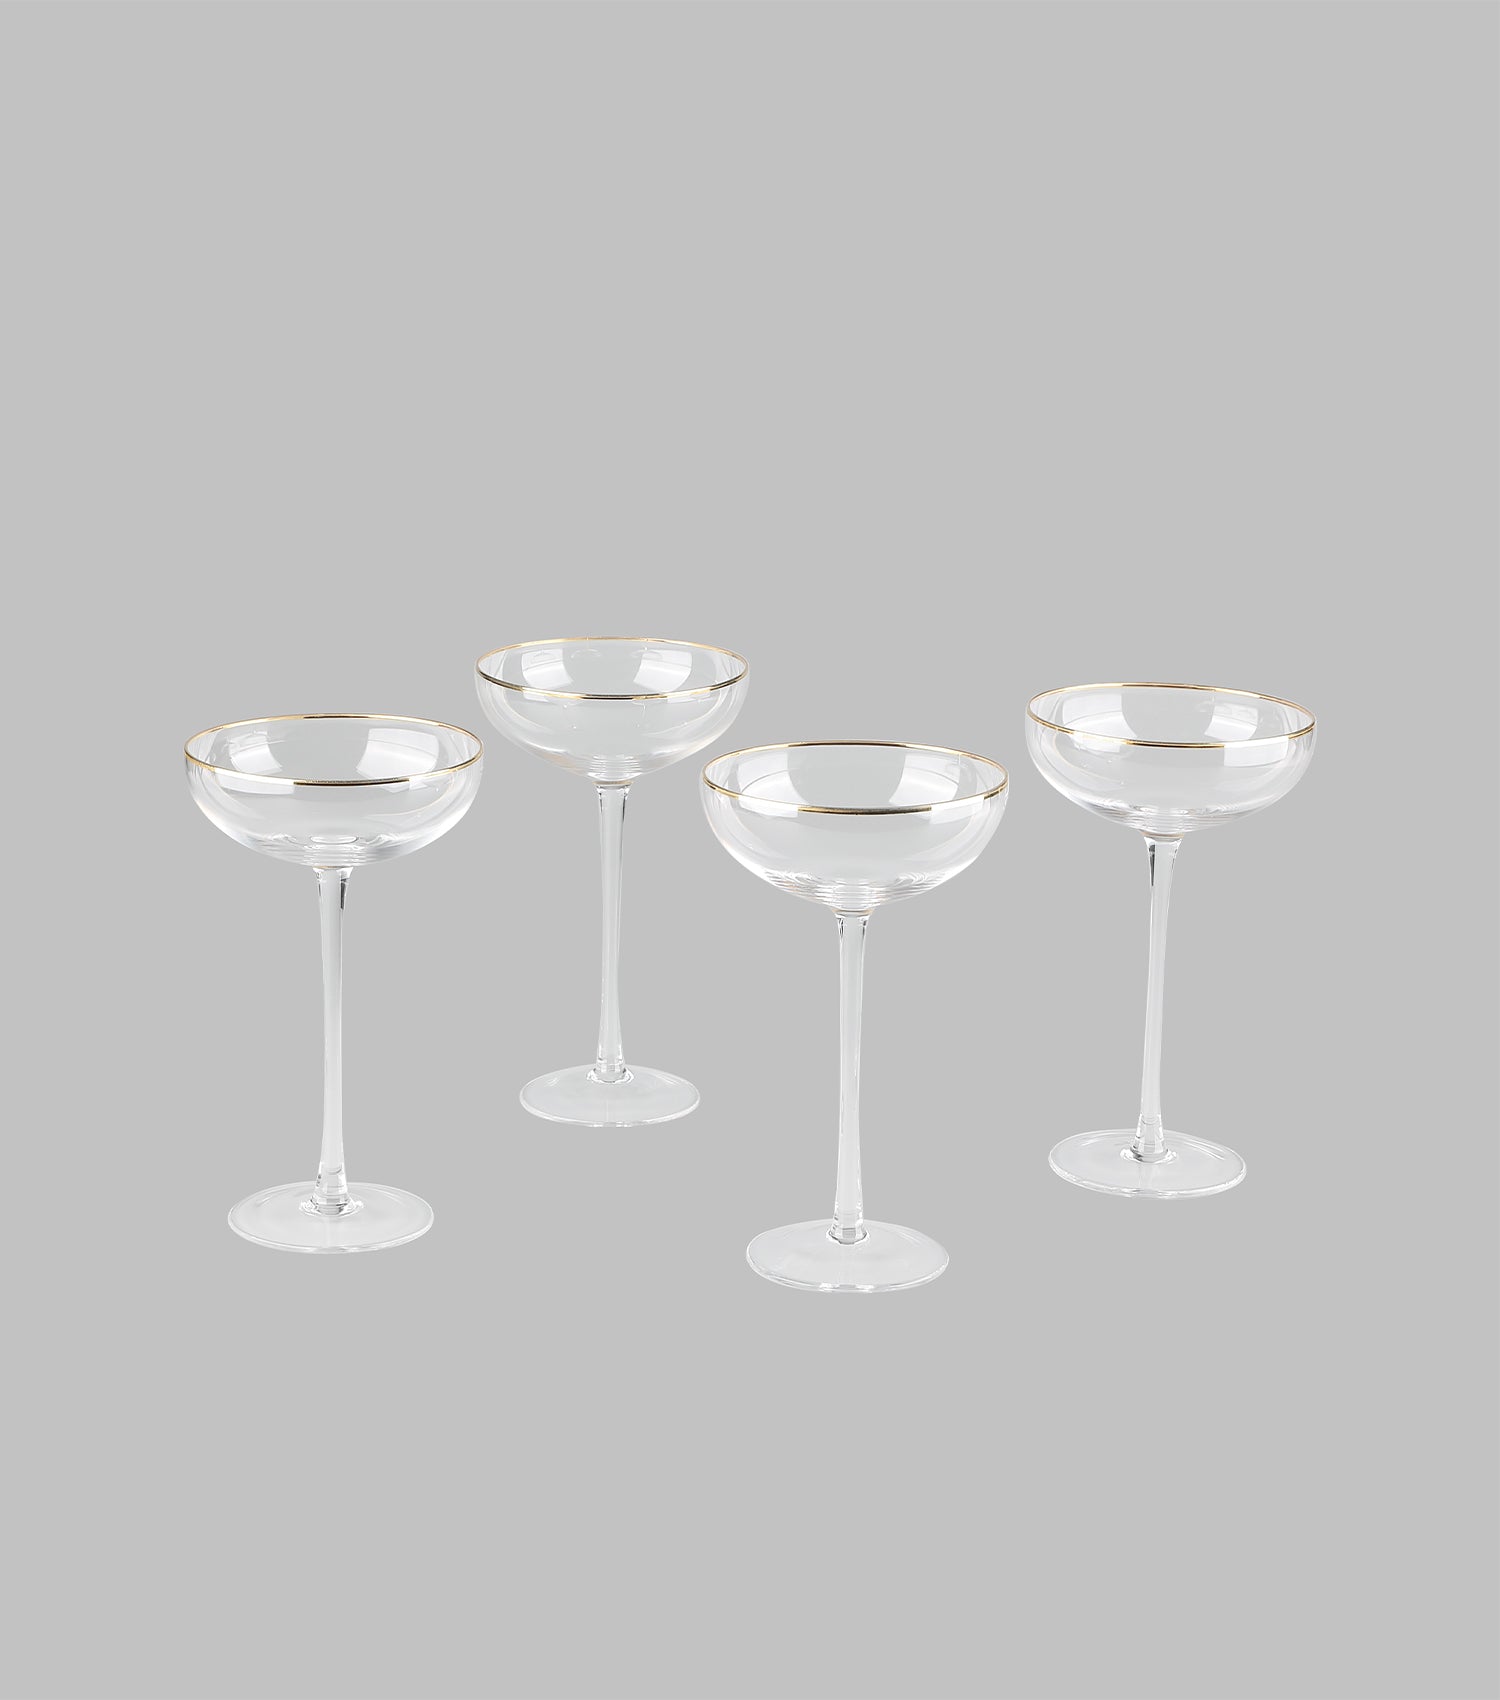 Ridge Craft coupe glass with gold rim